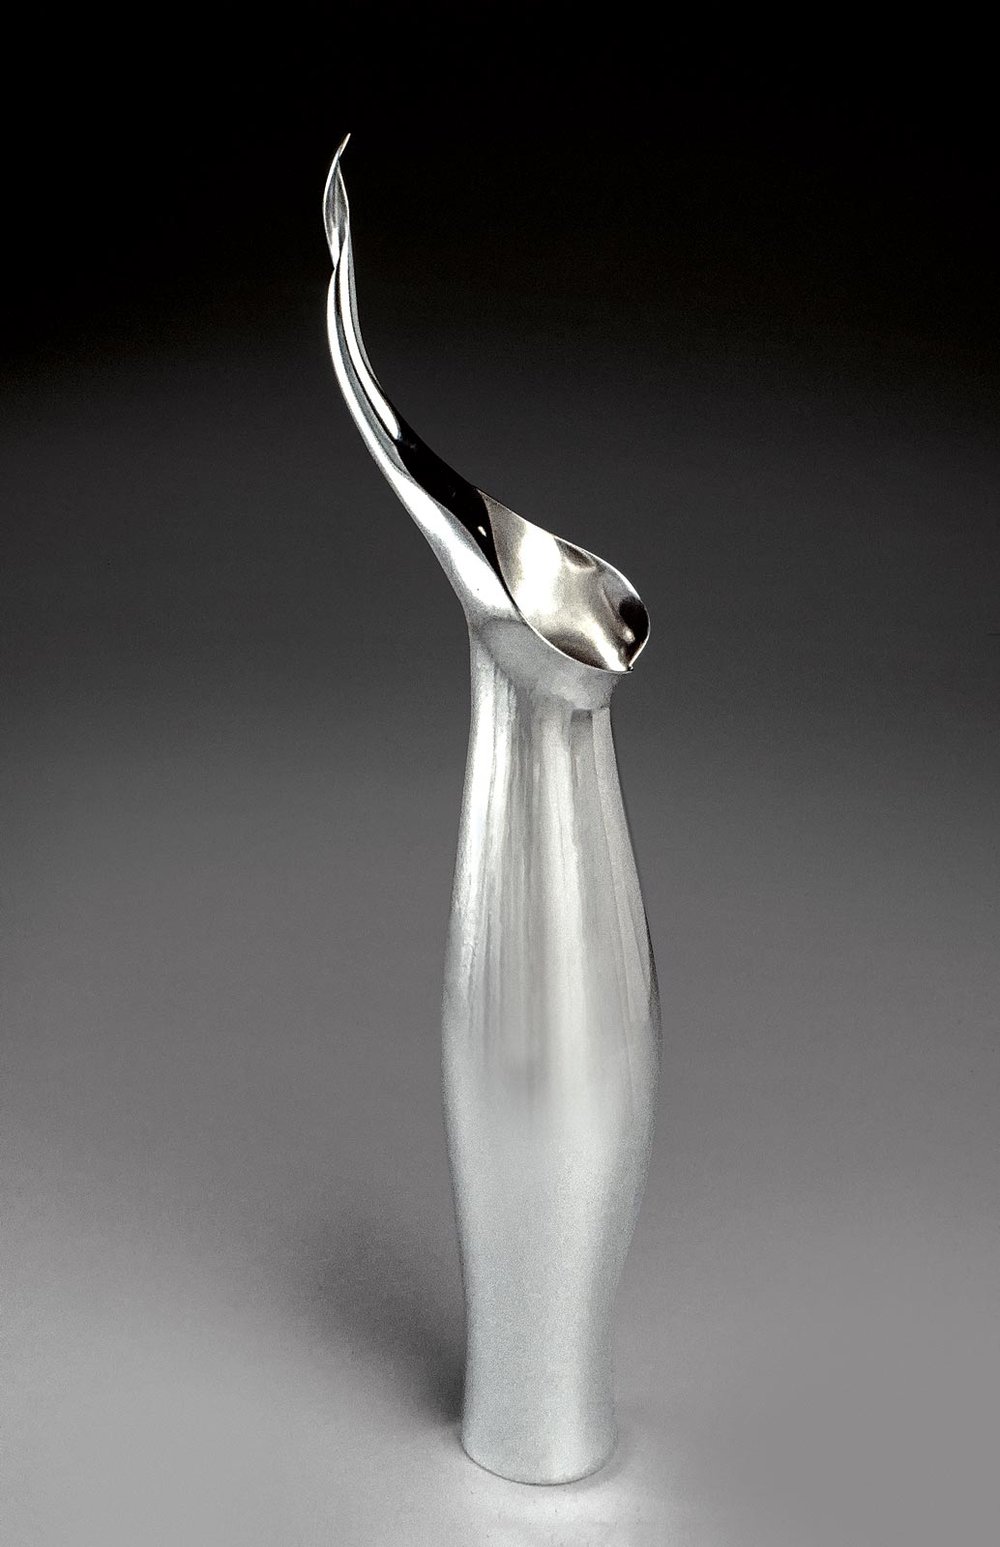  PEACE LILY (Artist’s proof for edition of 35, 1982–c. 1988) of electroformed copper (silver-plated), 53.3 × 19.1 × 8.6 centimeters, 1982.  Photograph by Peter Krumhardt.  